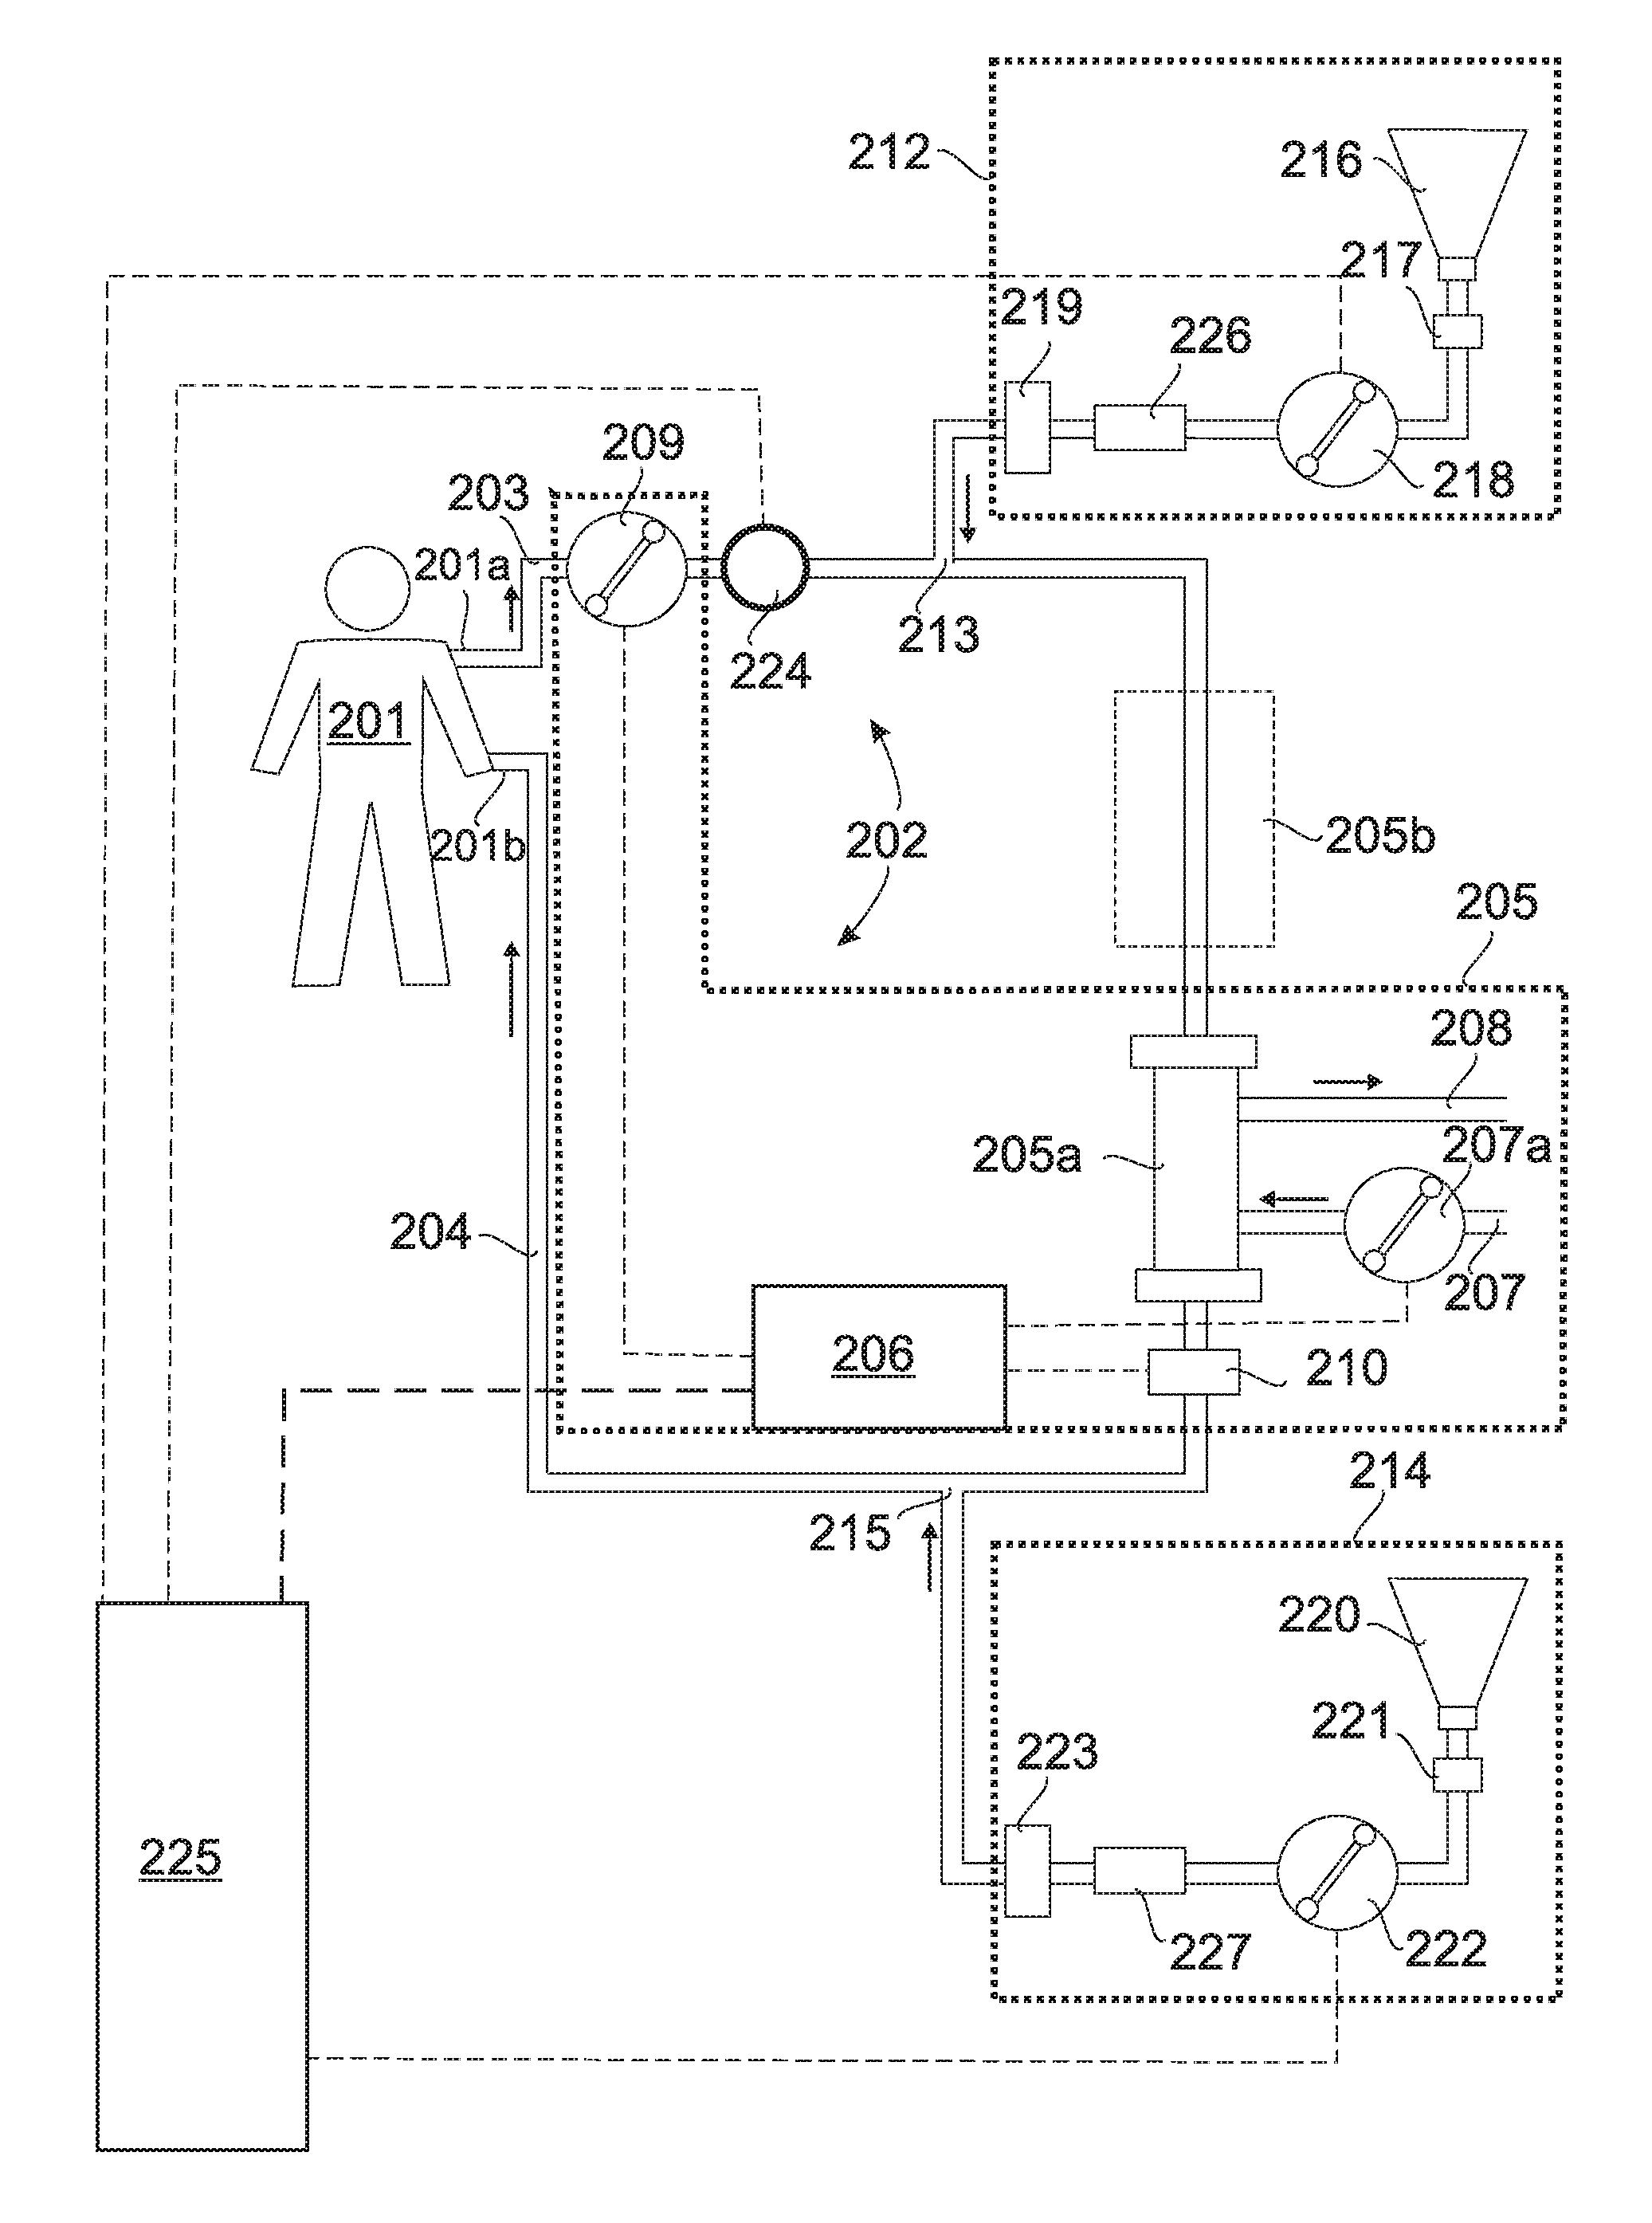 Method for detecting the ion concentrations of citrate anti-coagulated extracorporeal blood purification